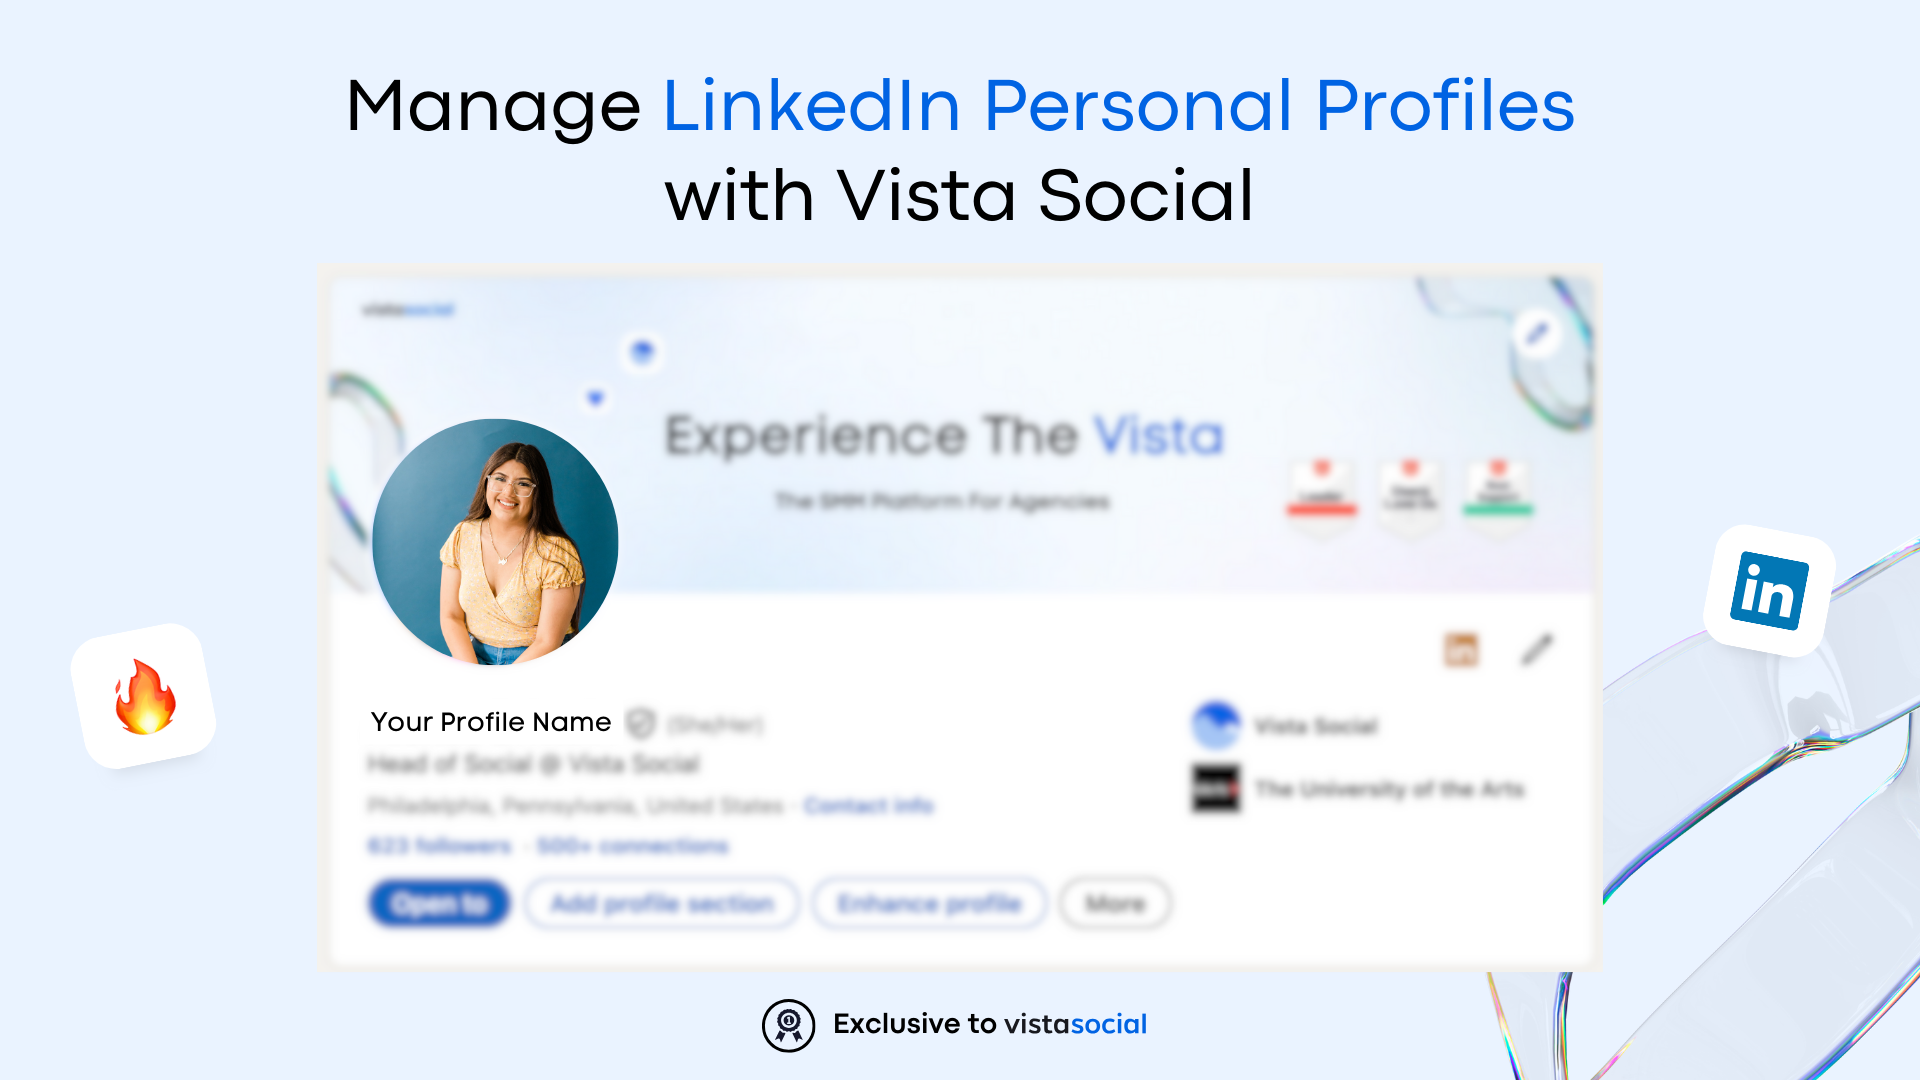 Manage LinkedIn Personal Profiles with Vista Social